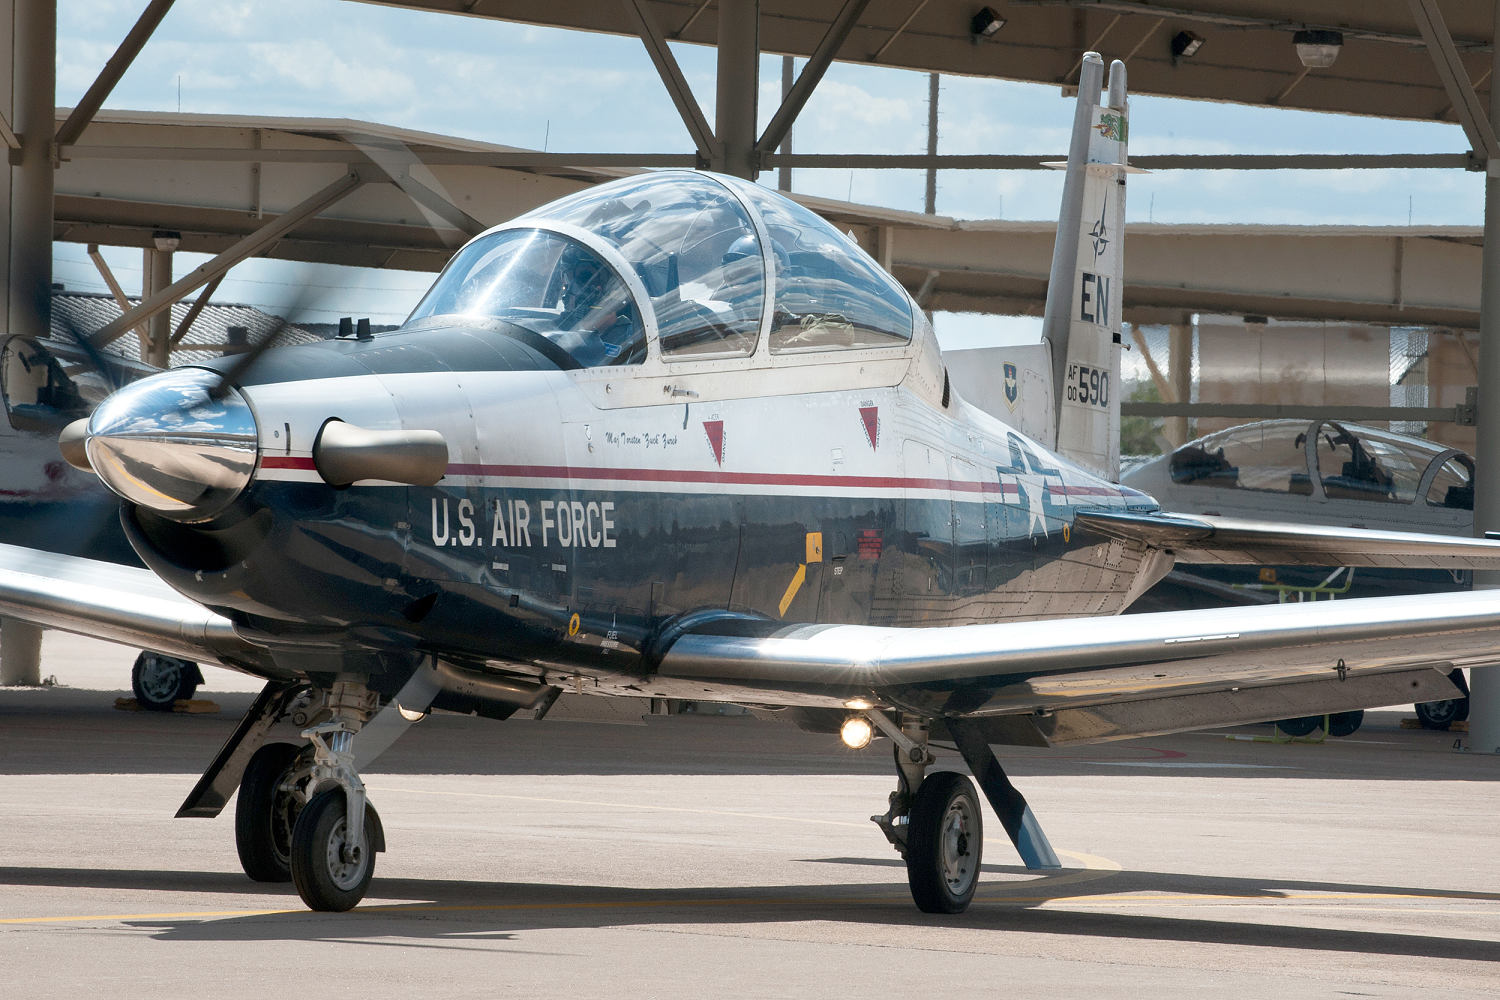 Air Force instructor dies after ejection seat goes off while plane was on the ground